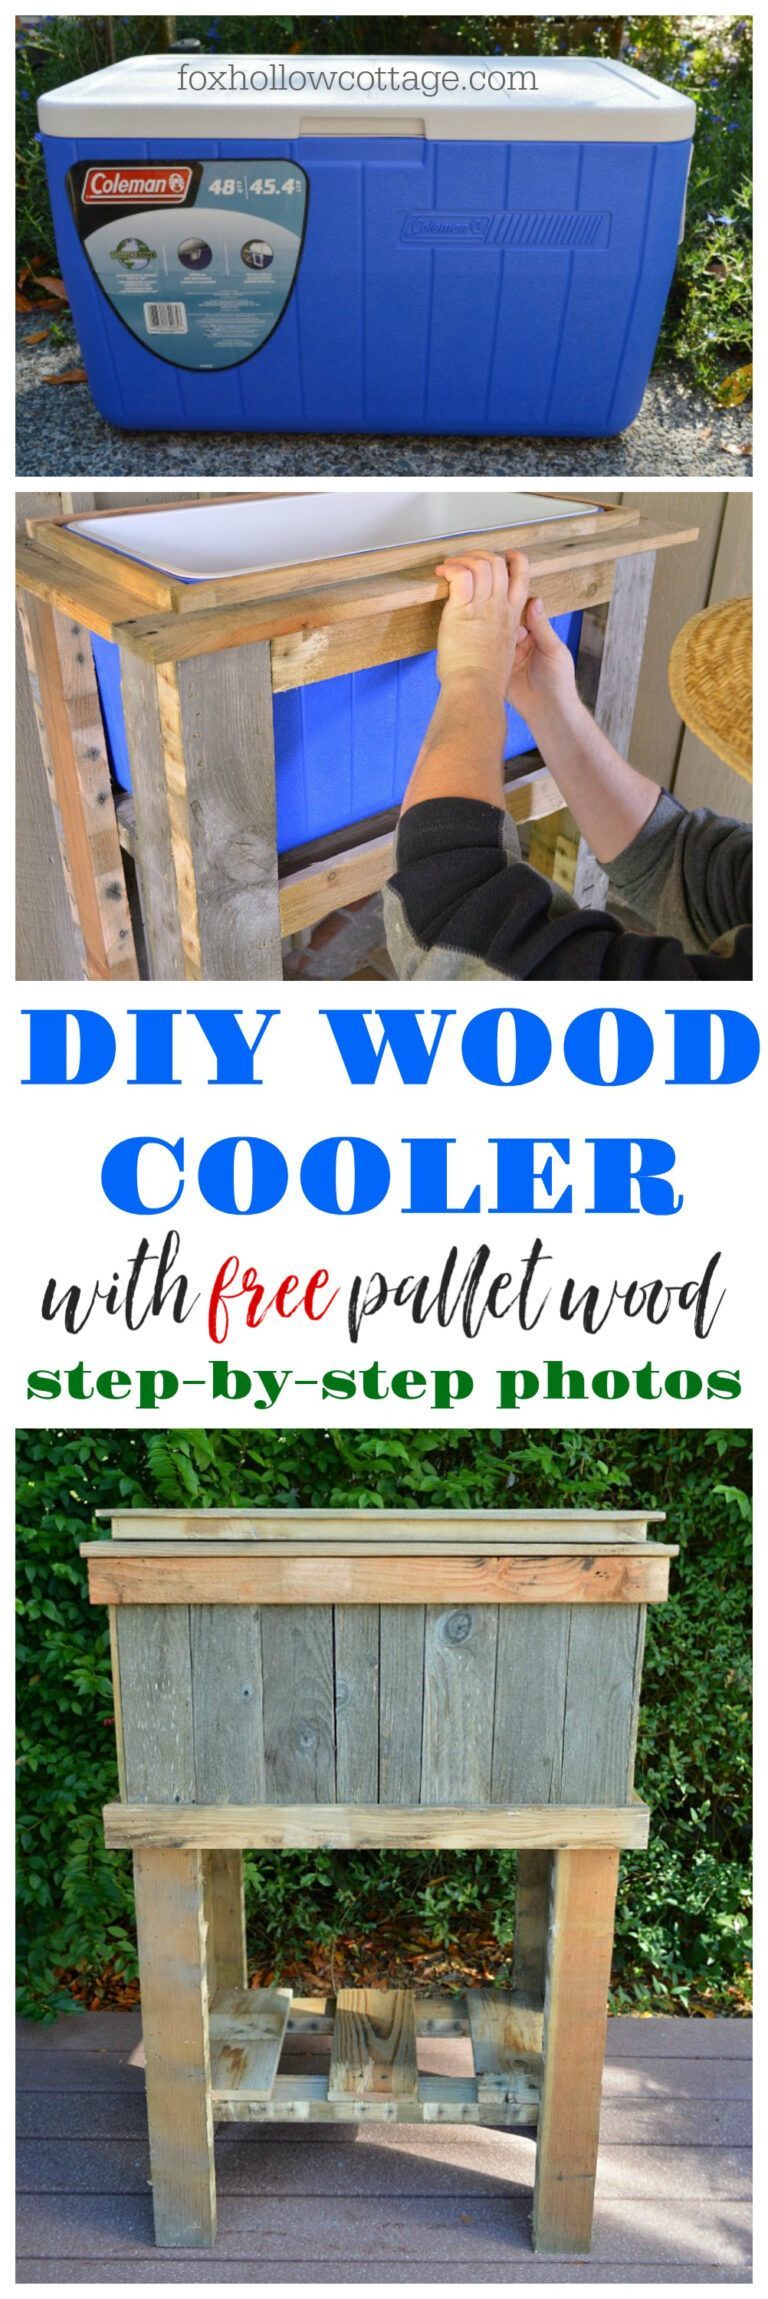 How To Build A Wood Deck Cooler - How To Build A Wood Deck Cooler -   21 diy projects for men how to build ideas